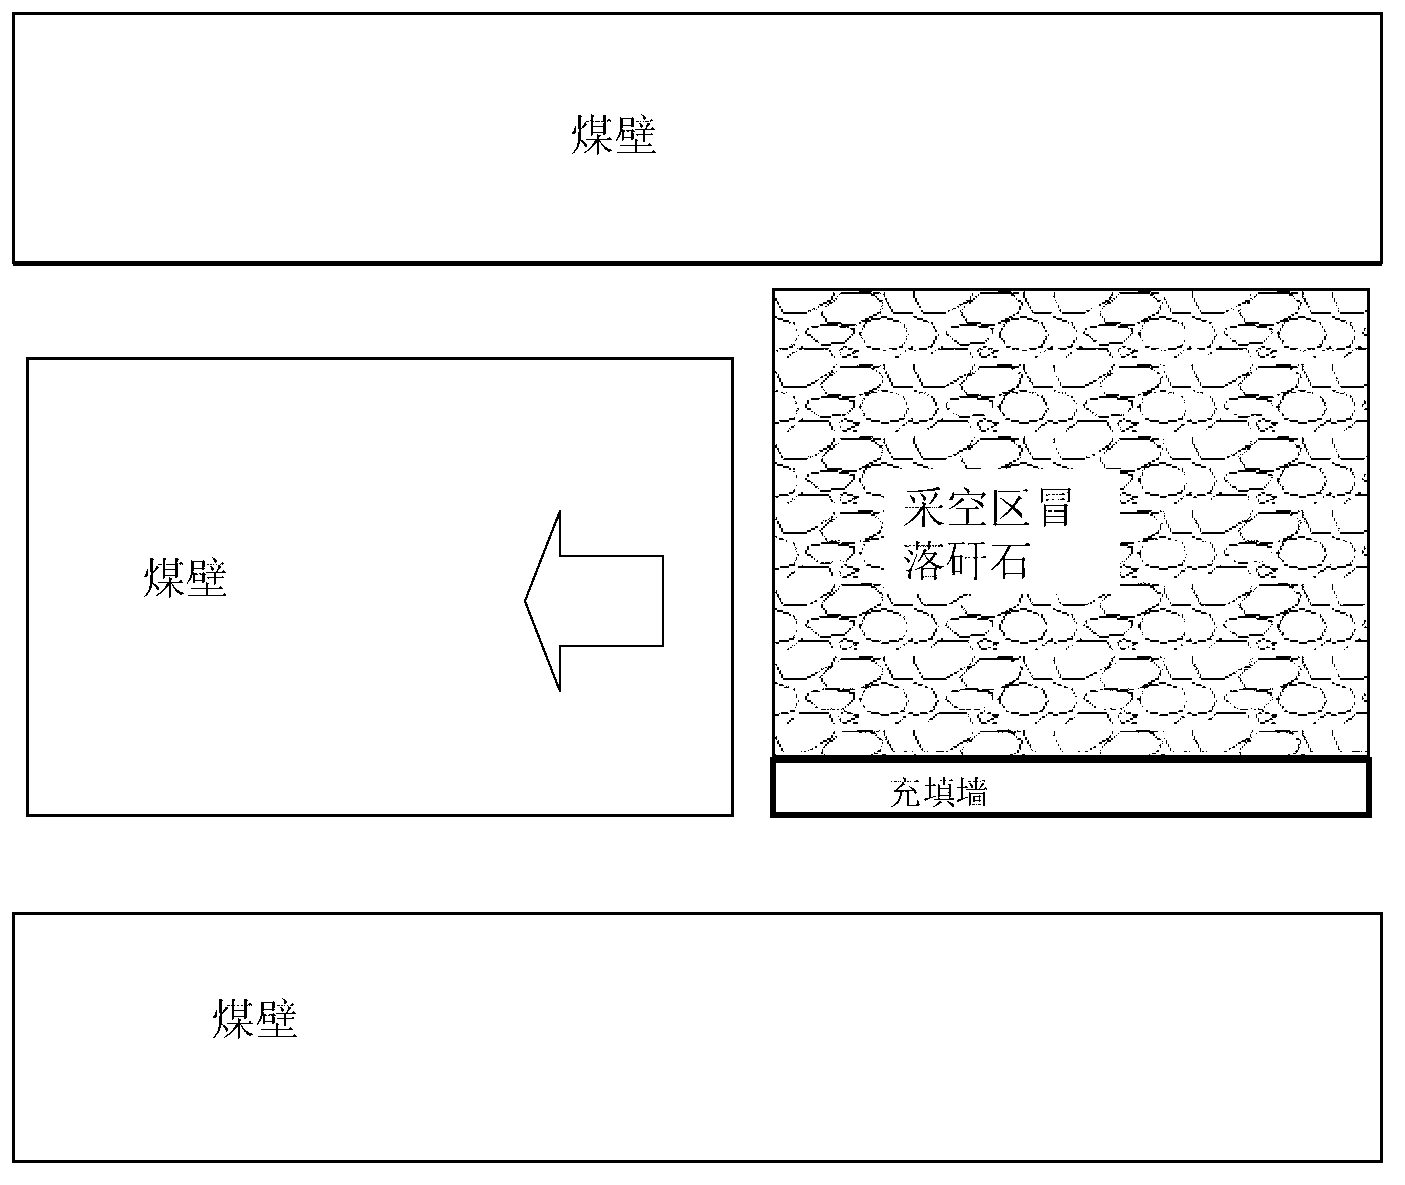 Method for actively controlling motion of coal mine critical layers by using strip filling walls